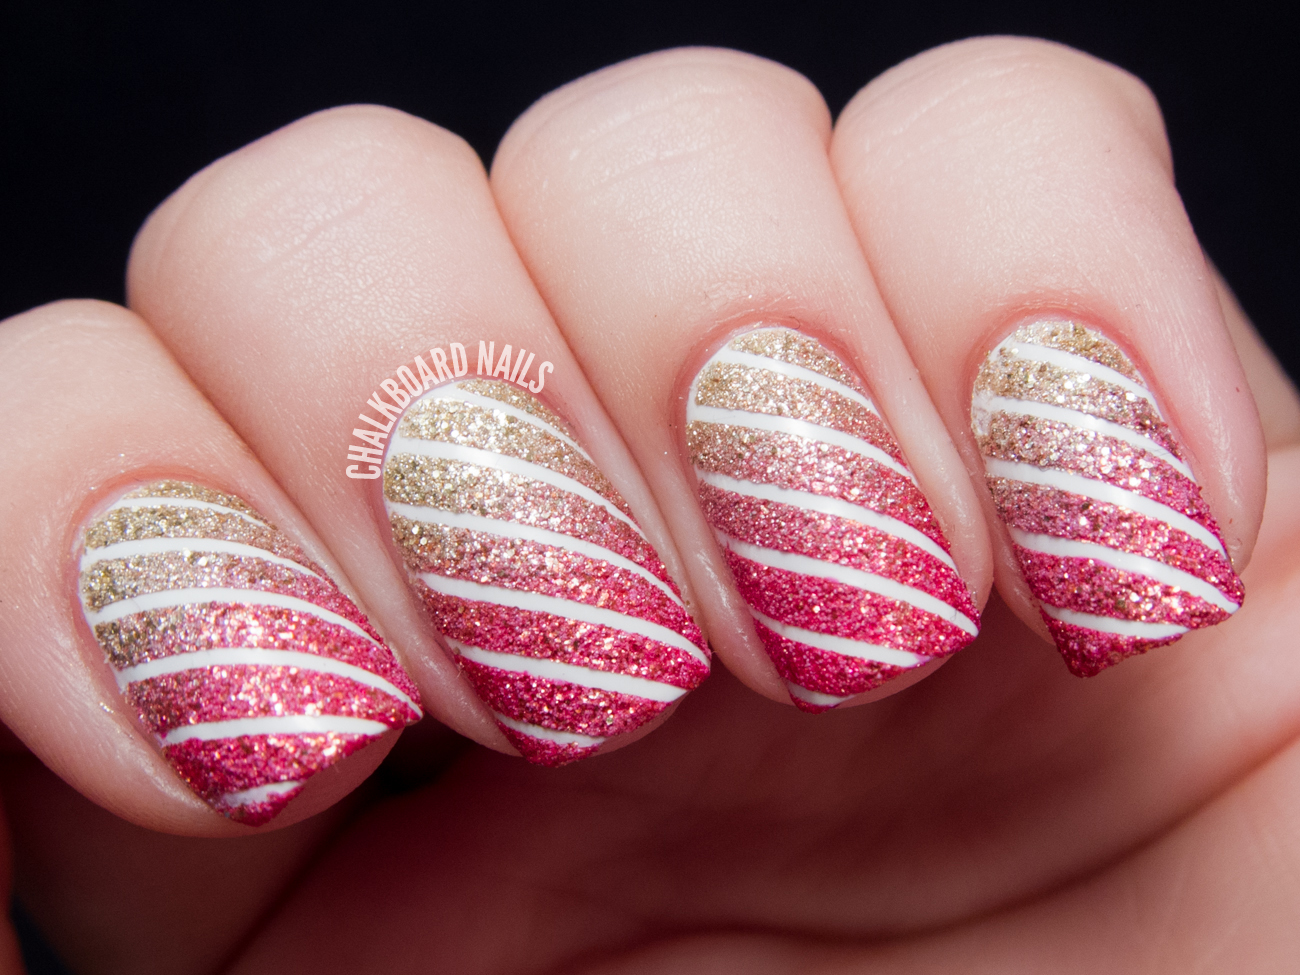 8. Fun and Colorful Striped Nail Designs - wide 2